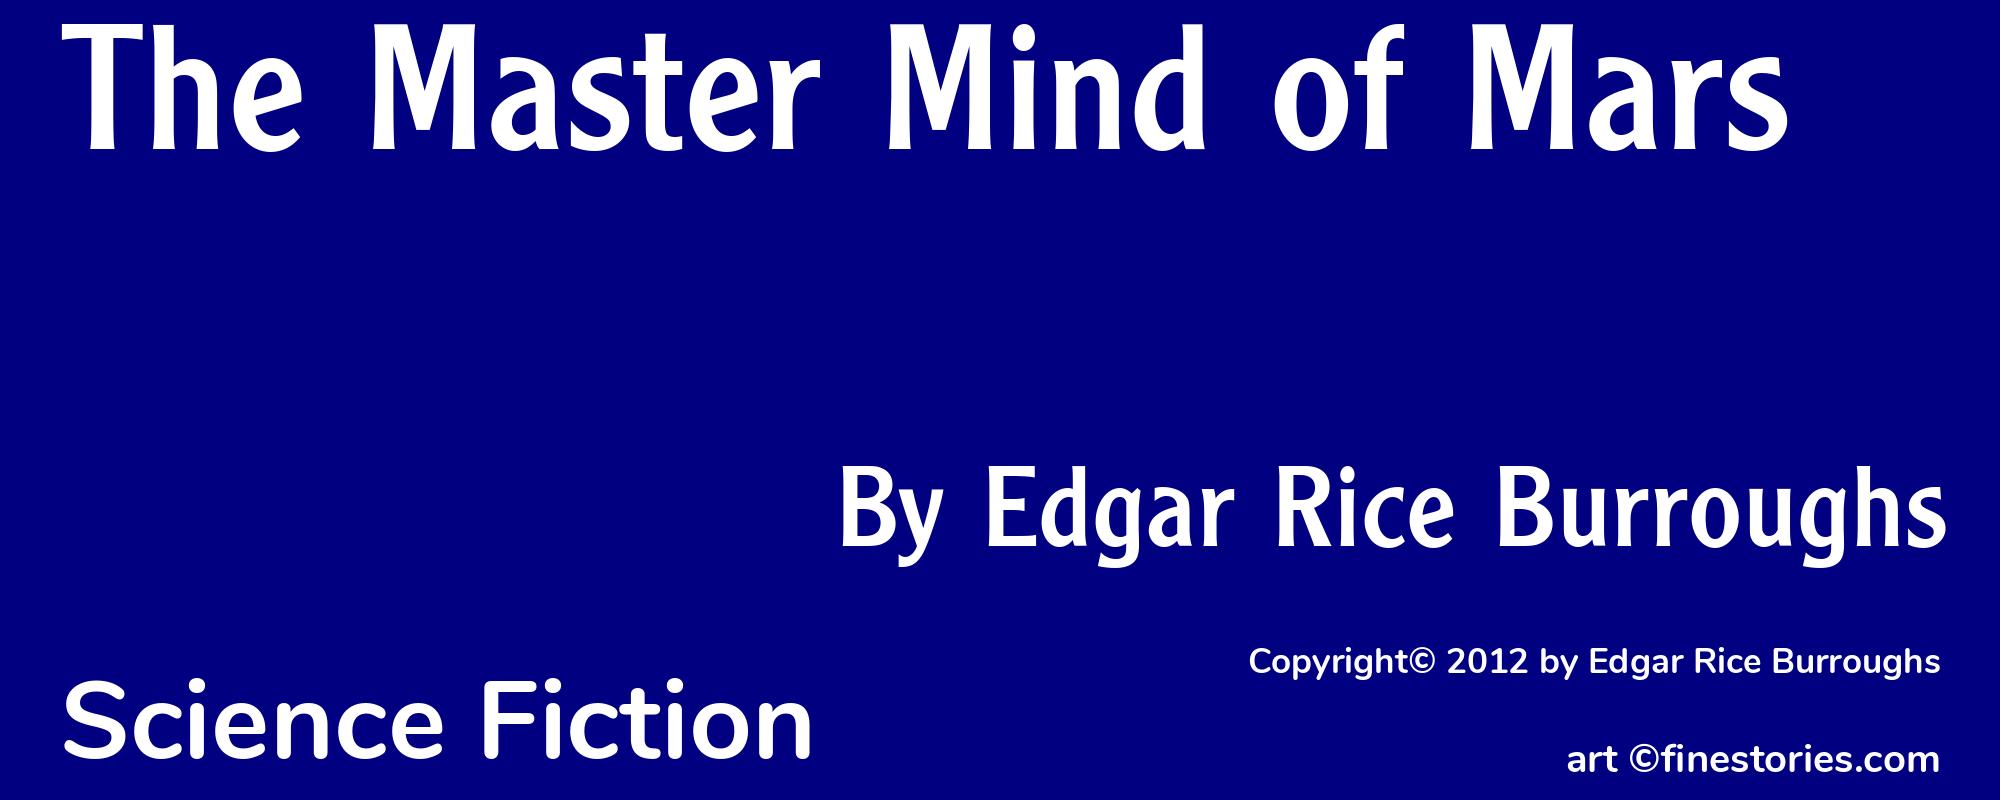 The Master Mind of Mars - Cover